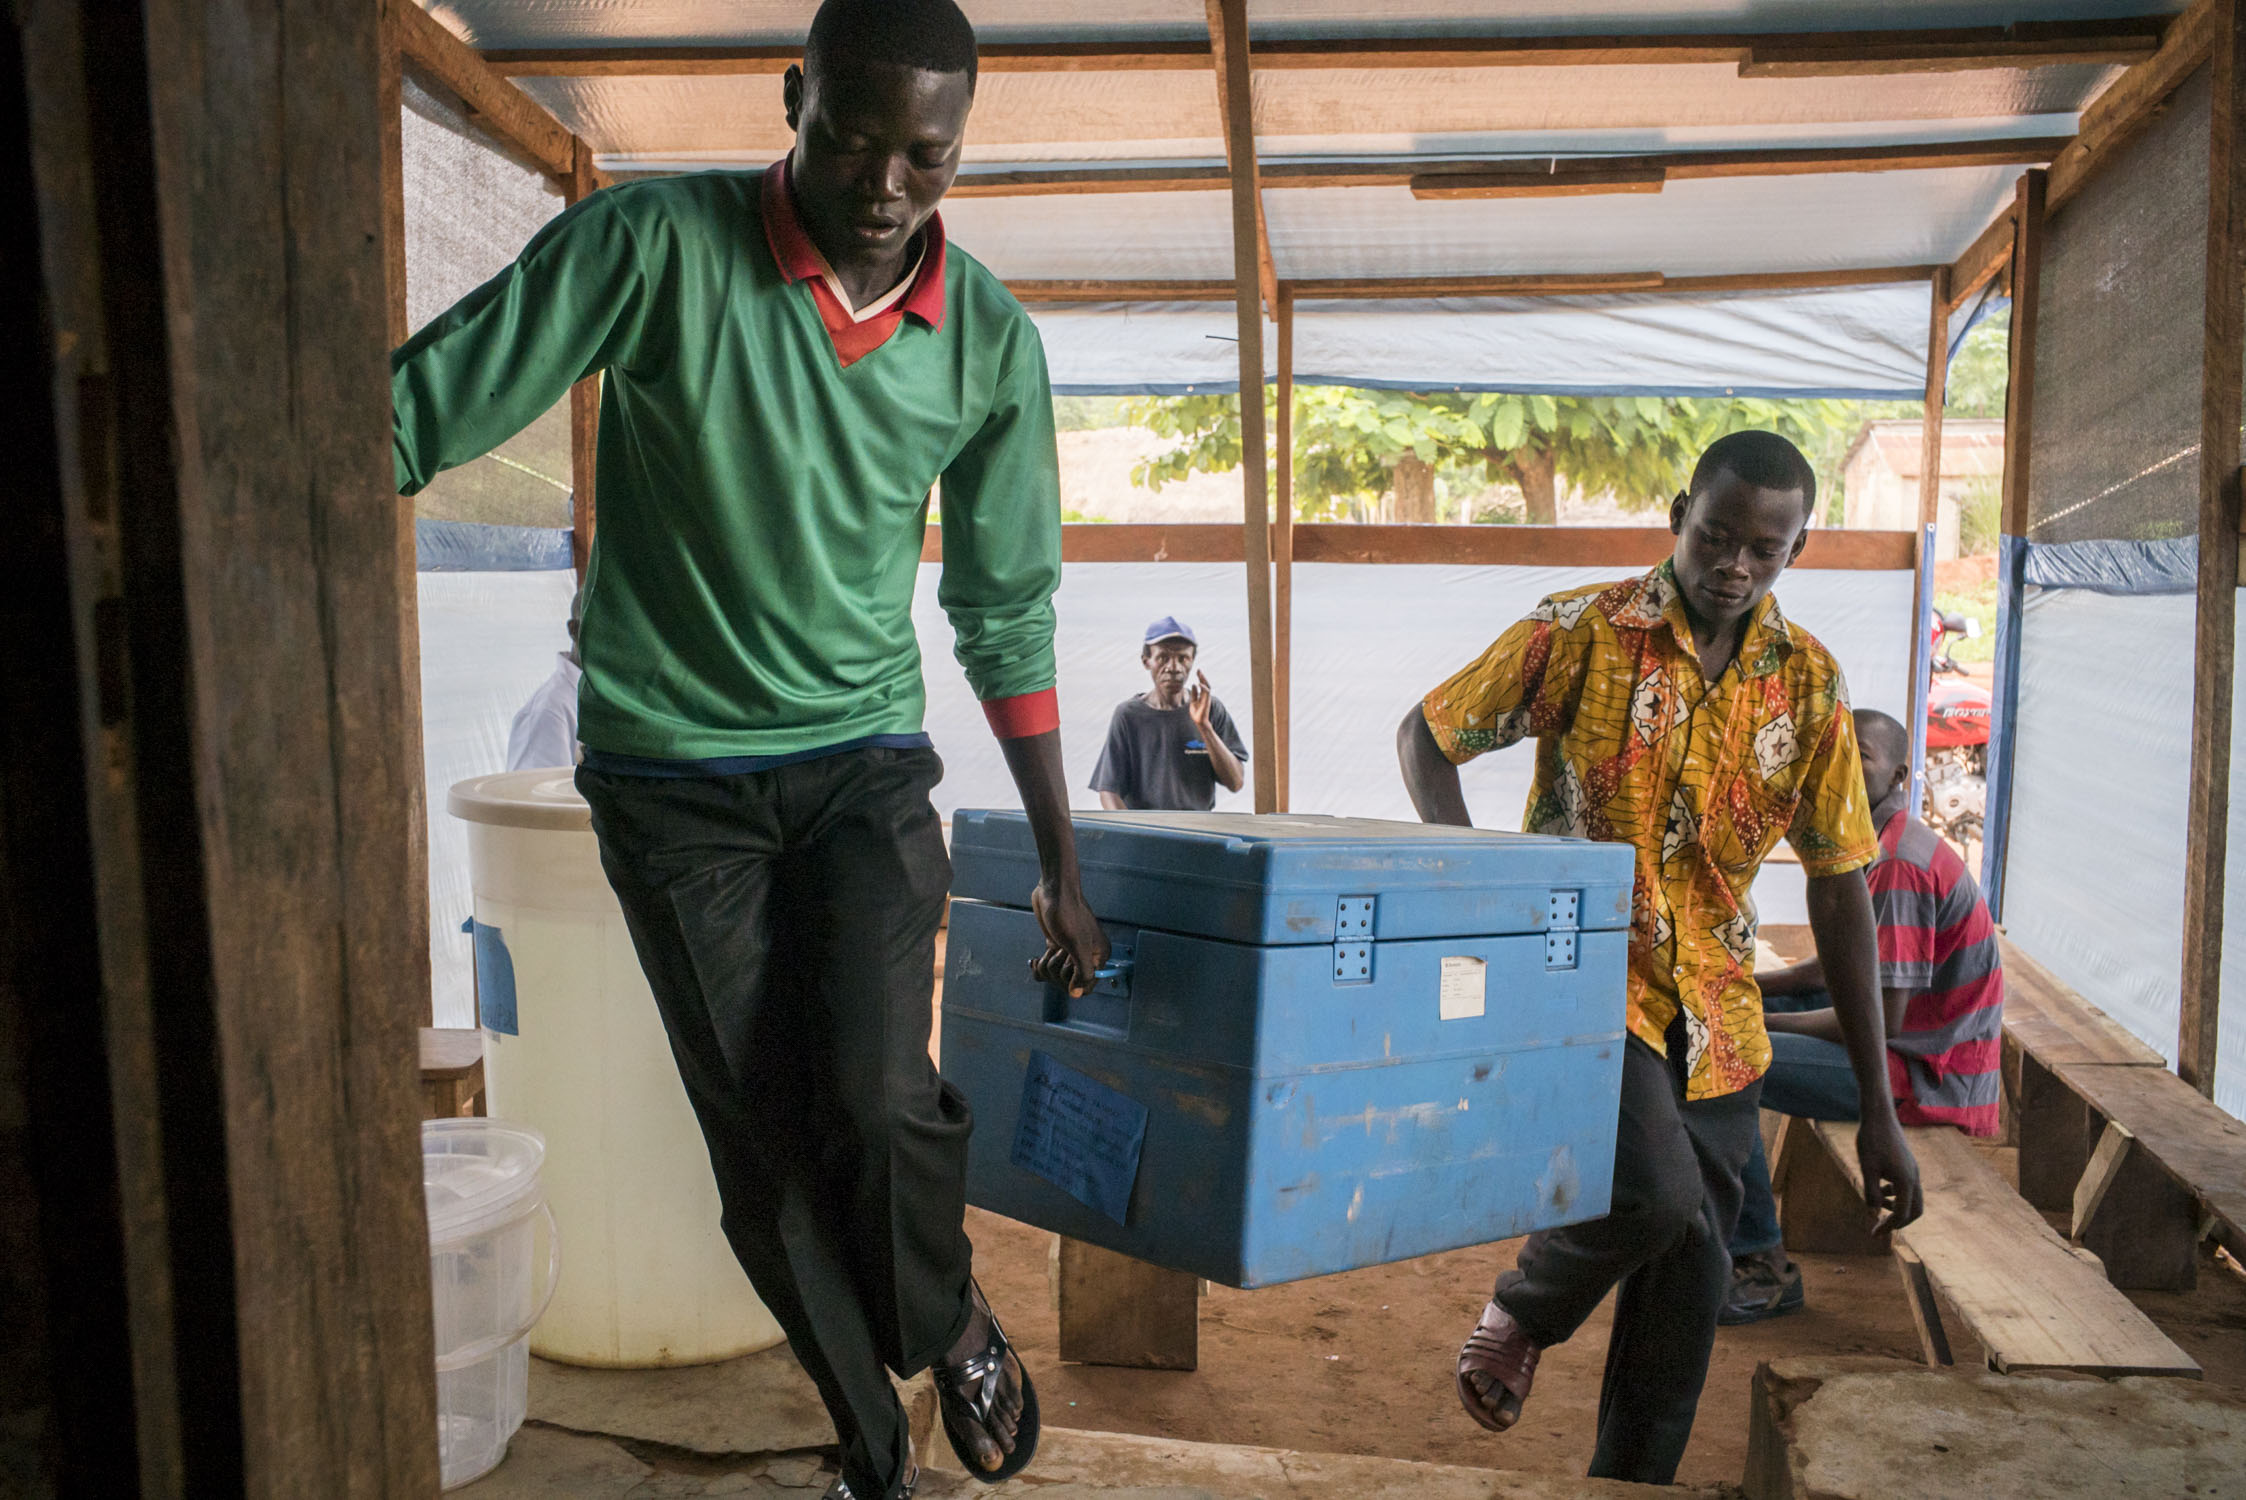  Local health workers carry in a cooler with vaccines into a health center in Monga, a town in a remote region of northern Democratic Republic of the Congo (DRC). The vaccines are to be administered the following day, as part of a 5-day measles vacci